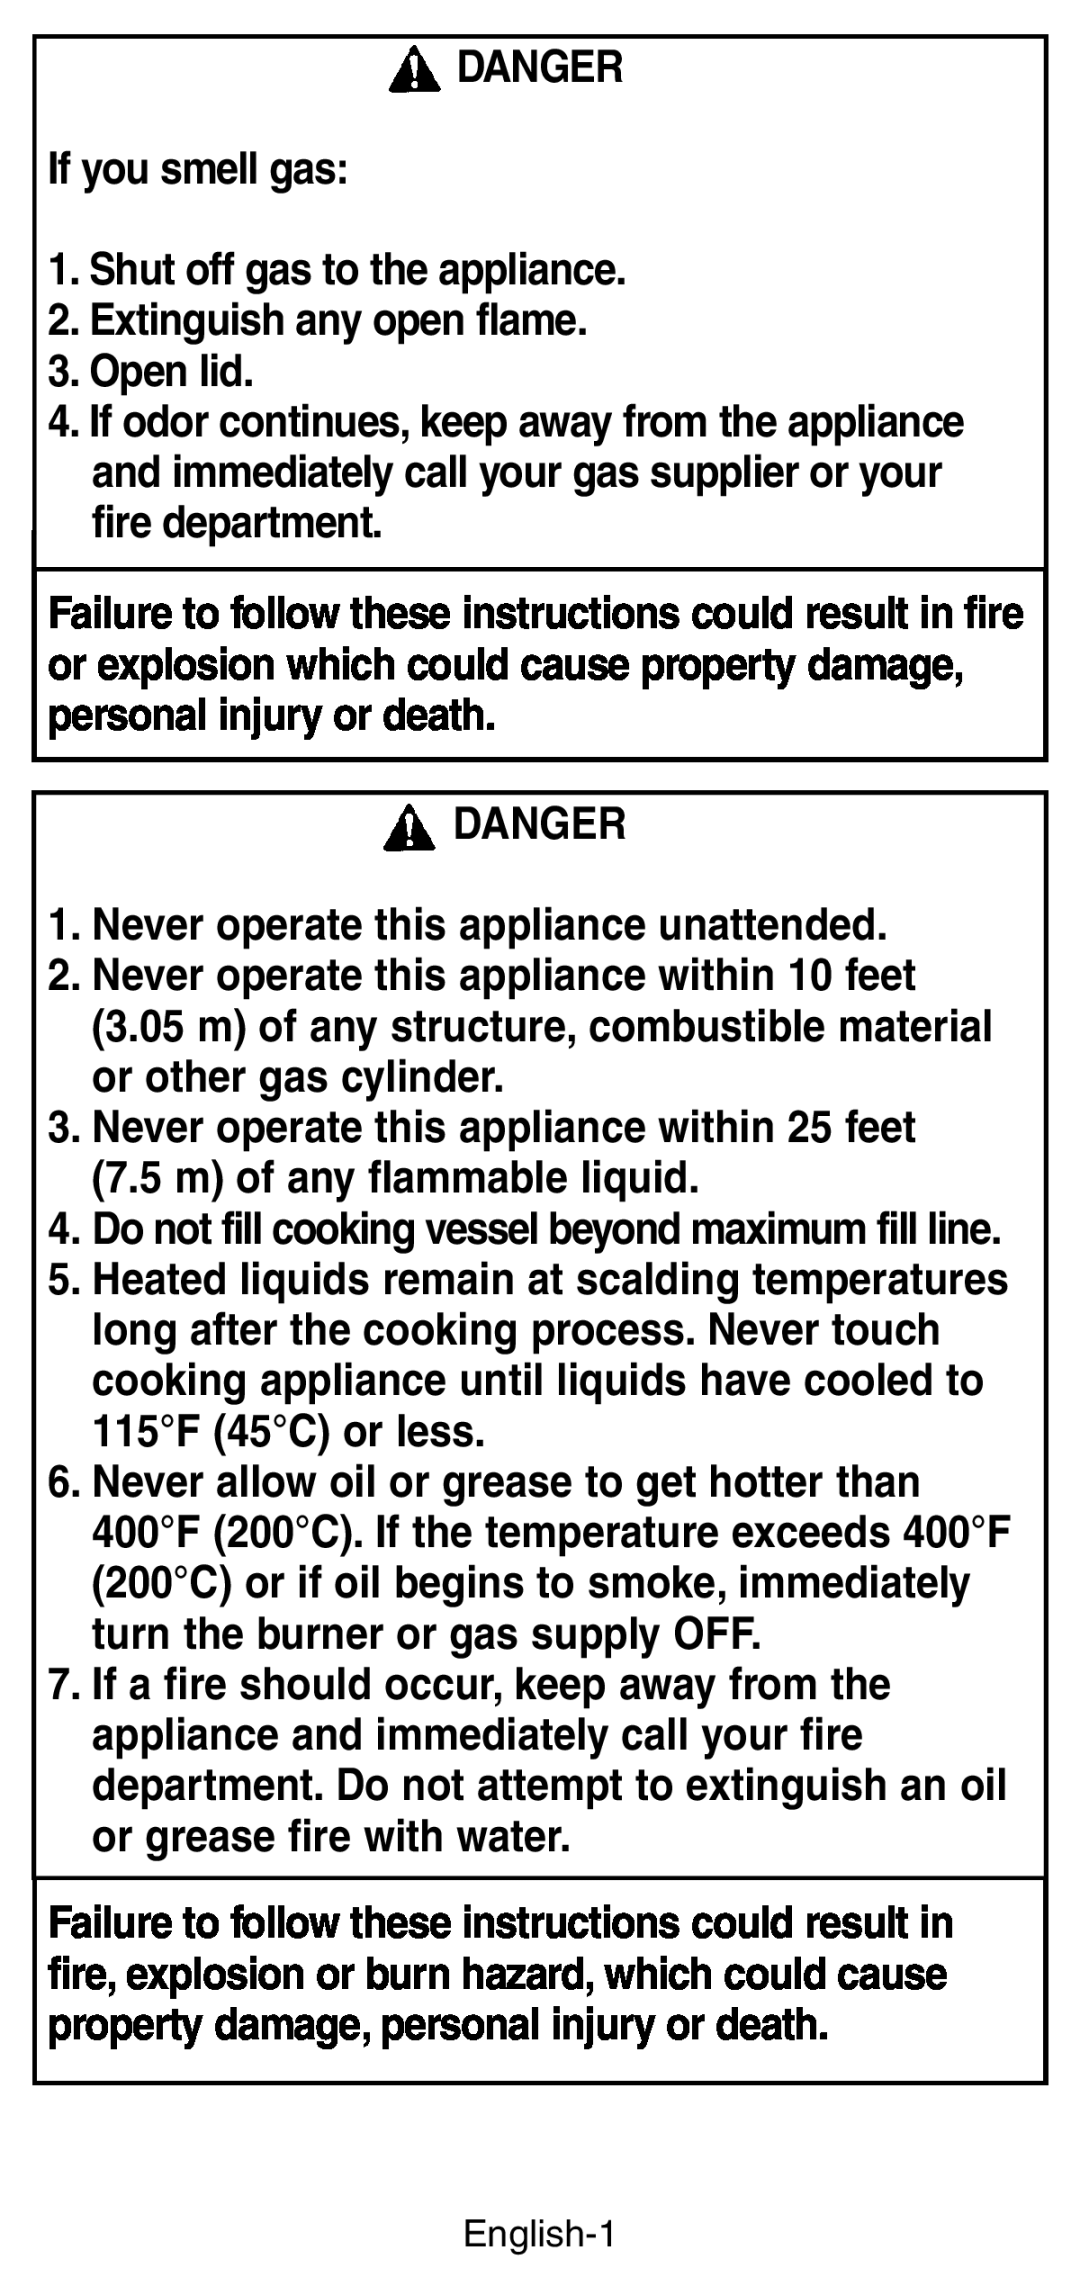 Coleman 9937 instruction manual DANGER If you smell gas 1. Shut off gas to the appliance 